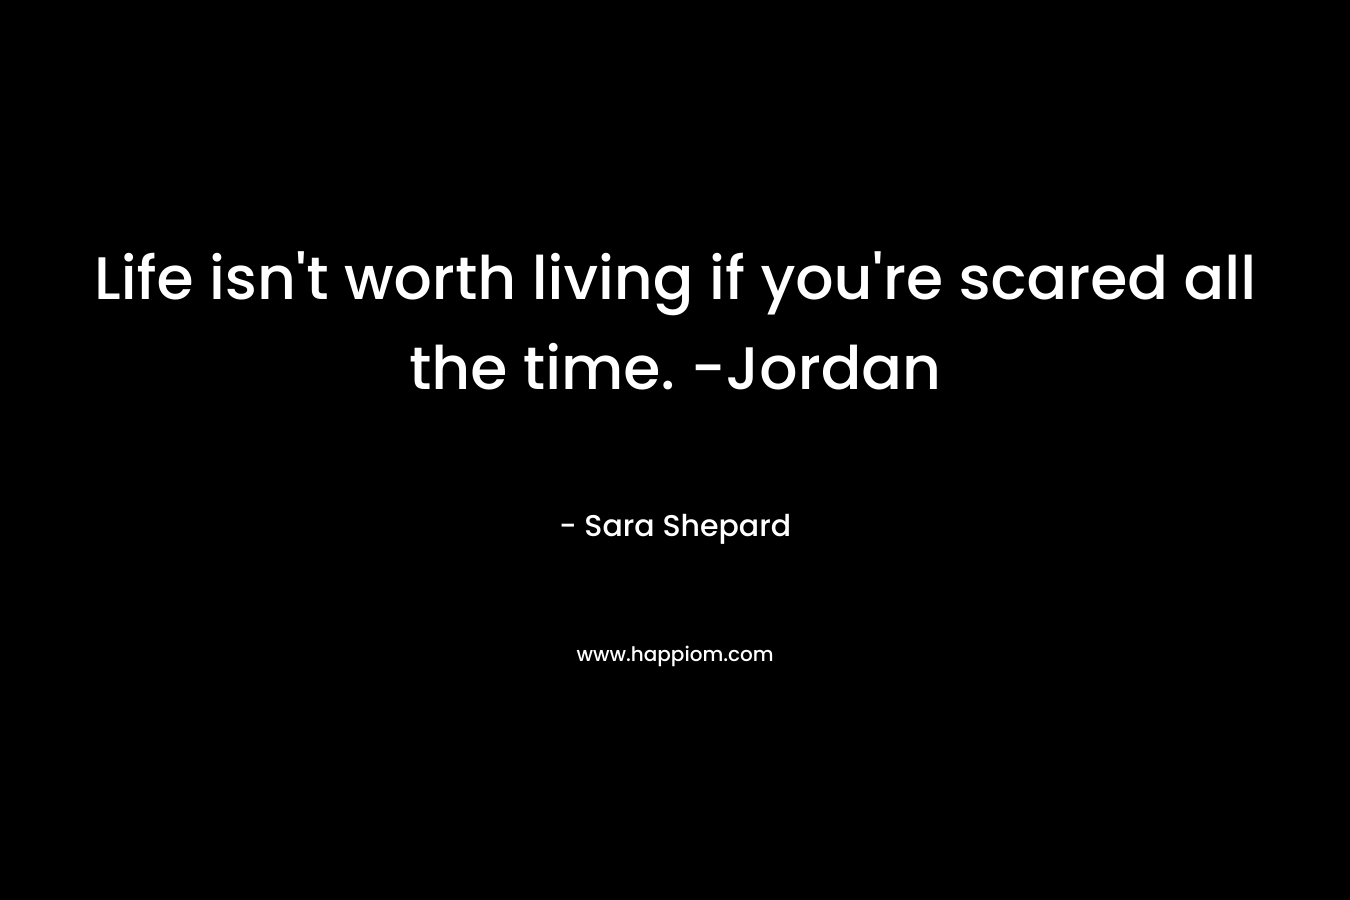 Life isn't worth living if you're scared all the time. -Jordan